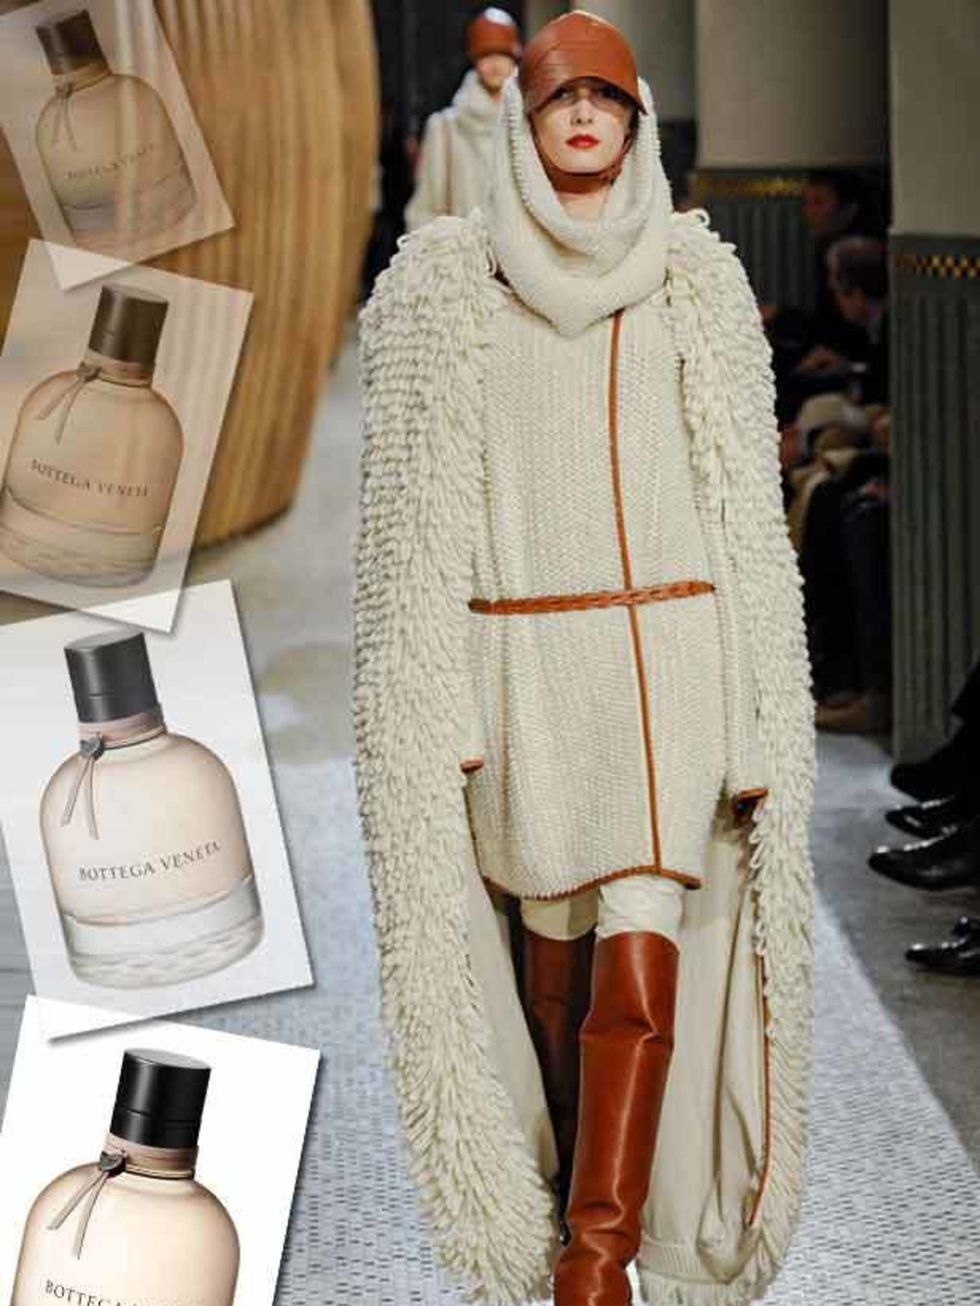 <p>It just wouldnt be AW without some uber-luxurious knits (see <a href="http://www.elleuk.com/catwalk/collections/hermes/autumn-winter-2011">Hermes</a>, pictured). Its the time when we want comfort and warmth the most. Bottega Veneta, £60 for 50ml EDP 